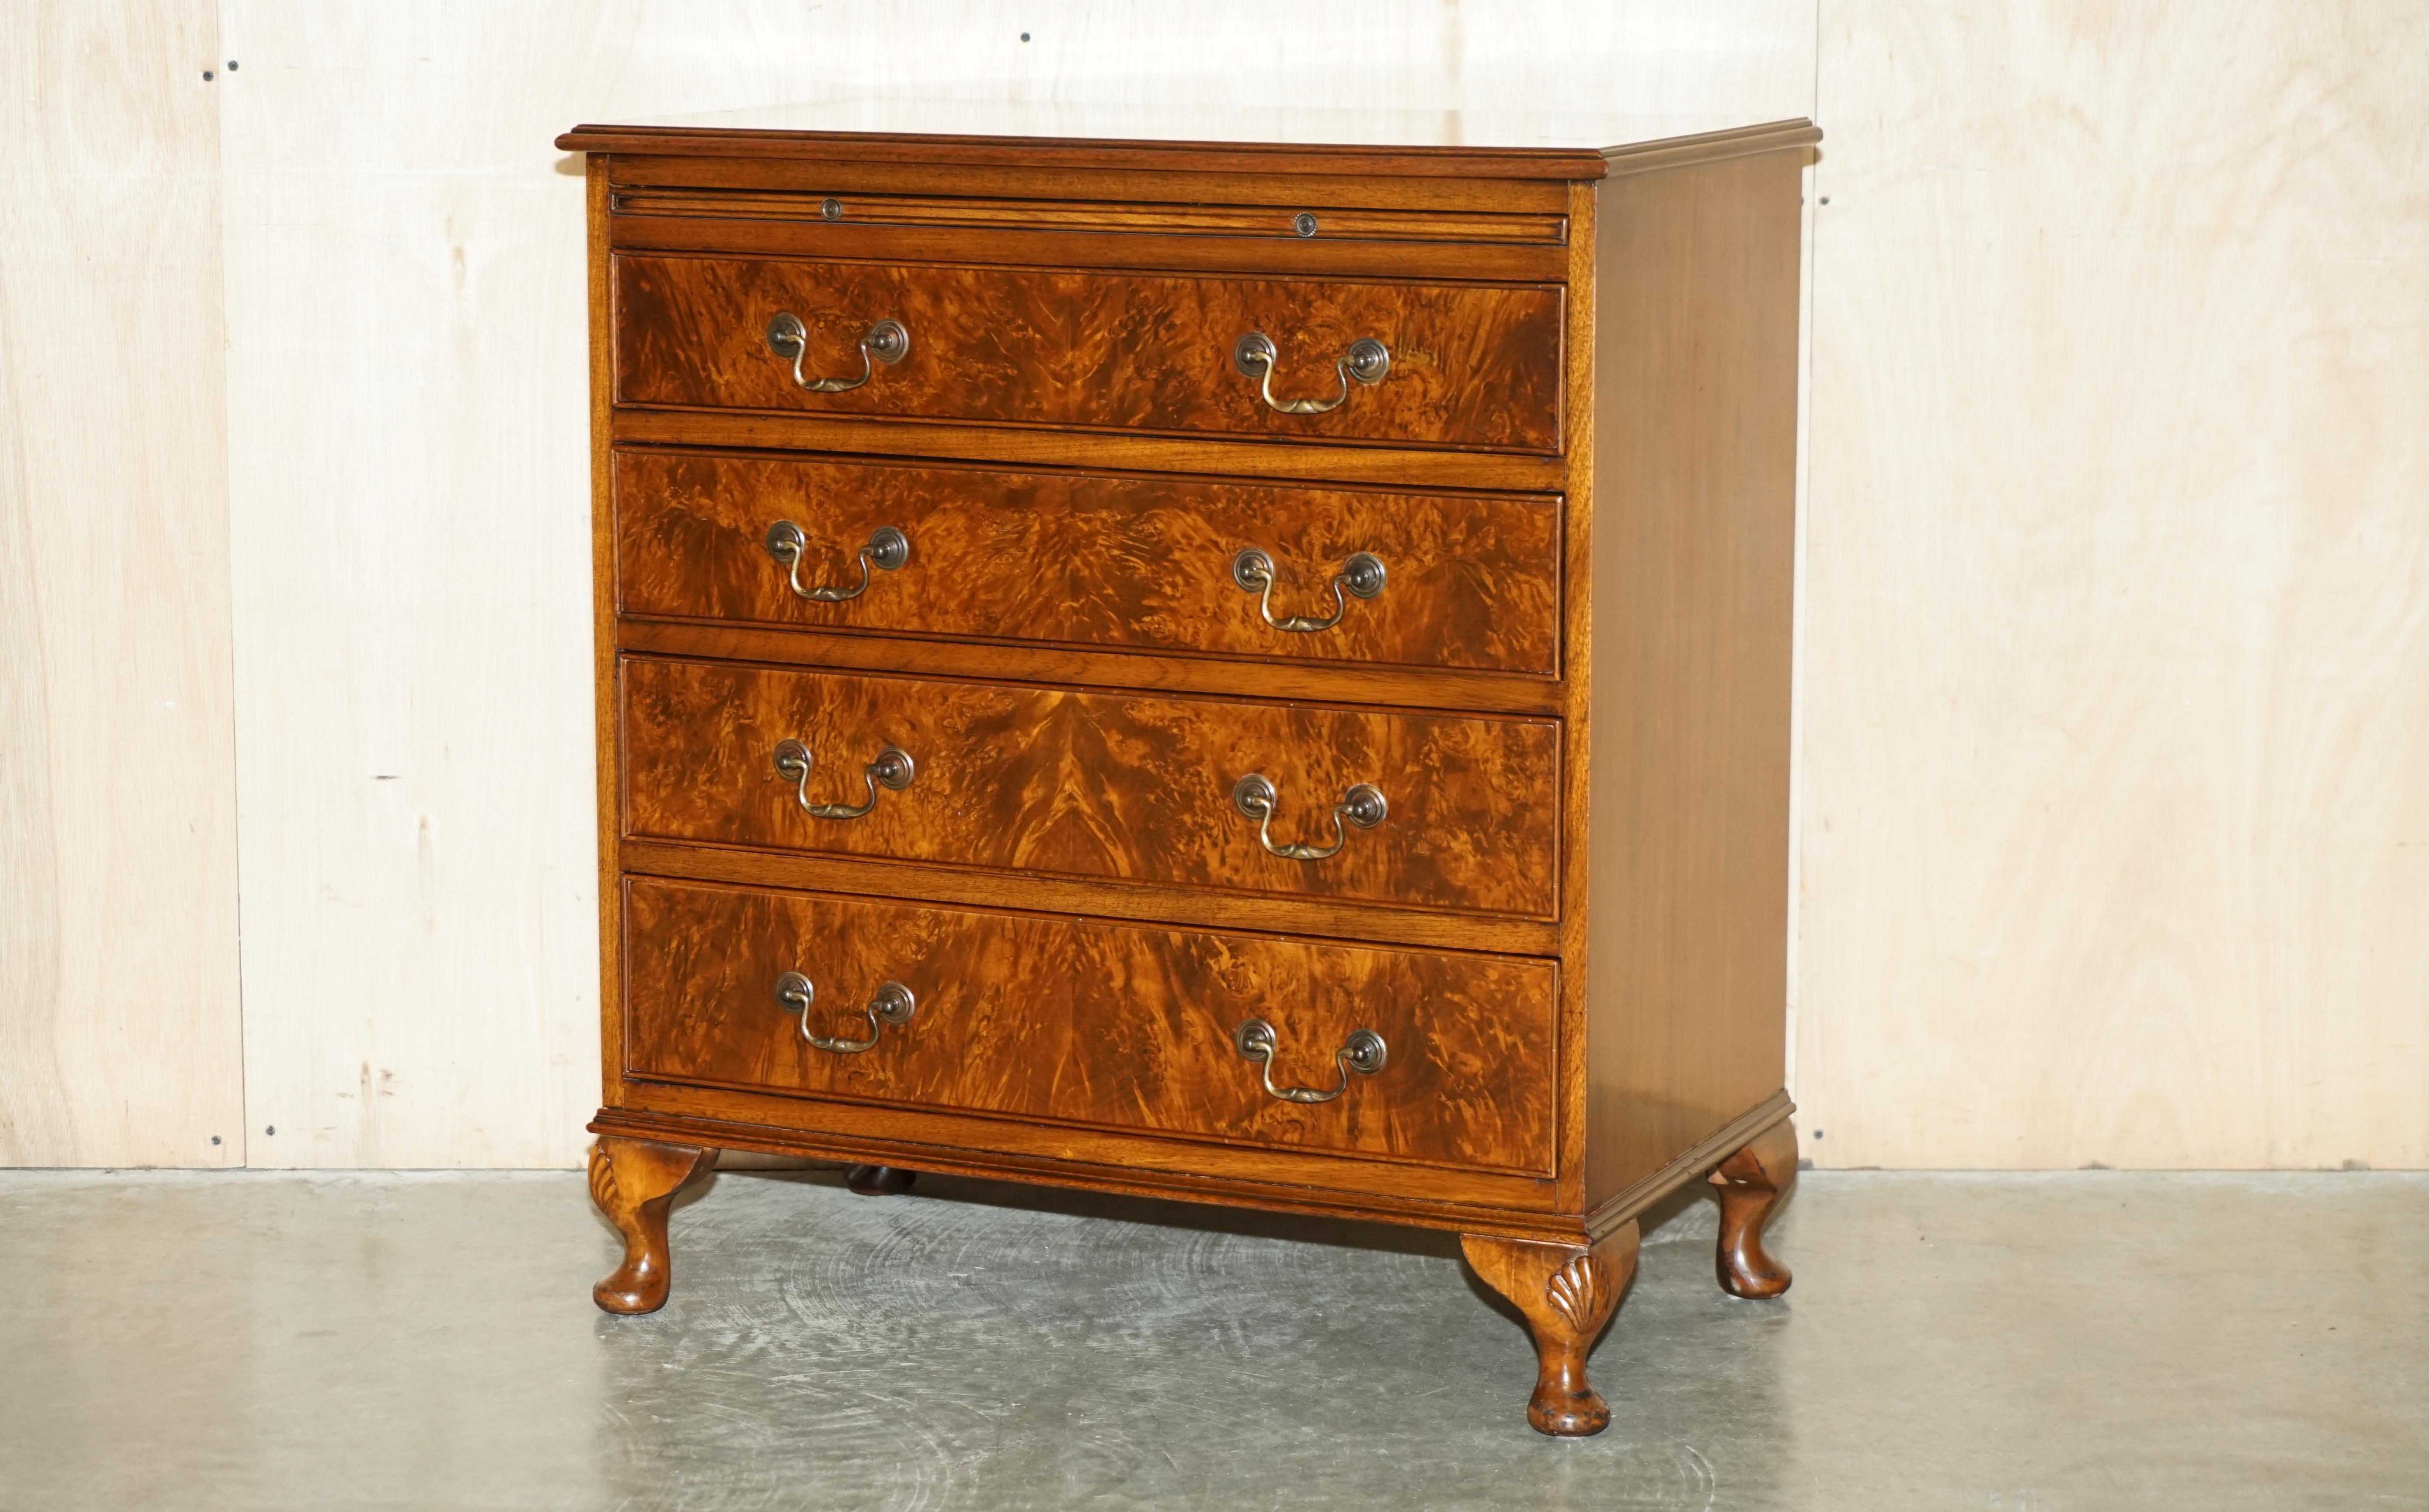 Royal House Antiques

Royal House Antiques is delighted to offer for sale this sublime vintage Burr Walnut Bachelors chest of drawers with butlers serving tray

Please note the delivery fee listed is just a guide, it covers within the M25 only for